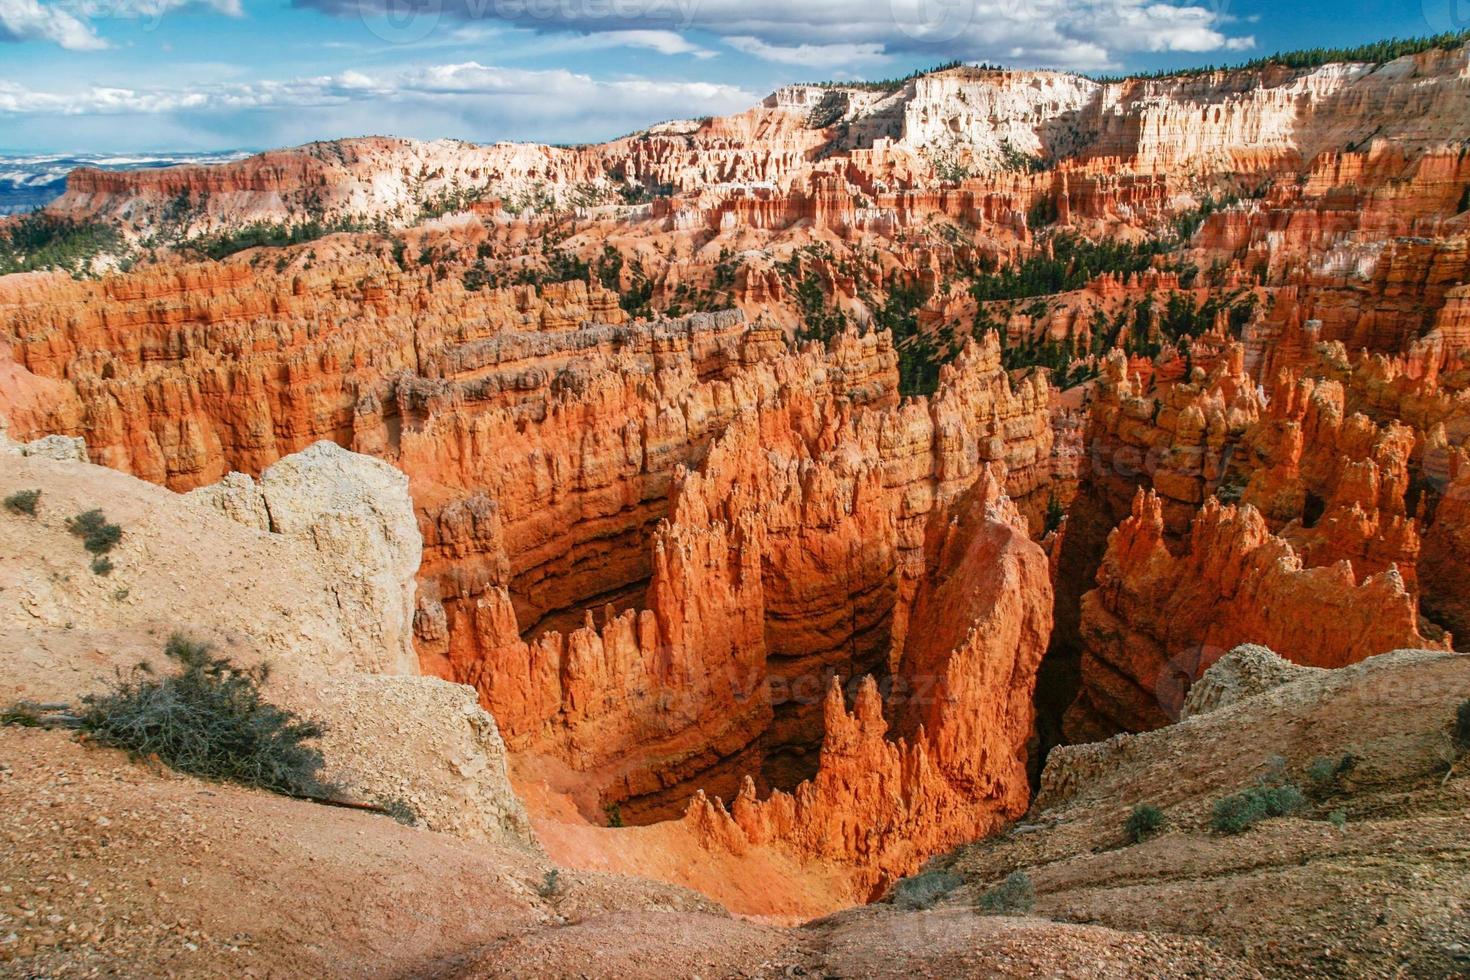 View from viewpoint of Bryce Canyon. photo